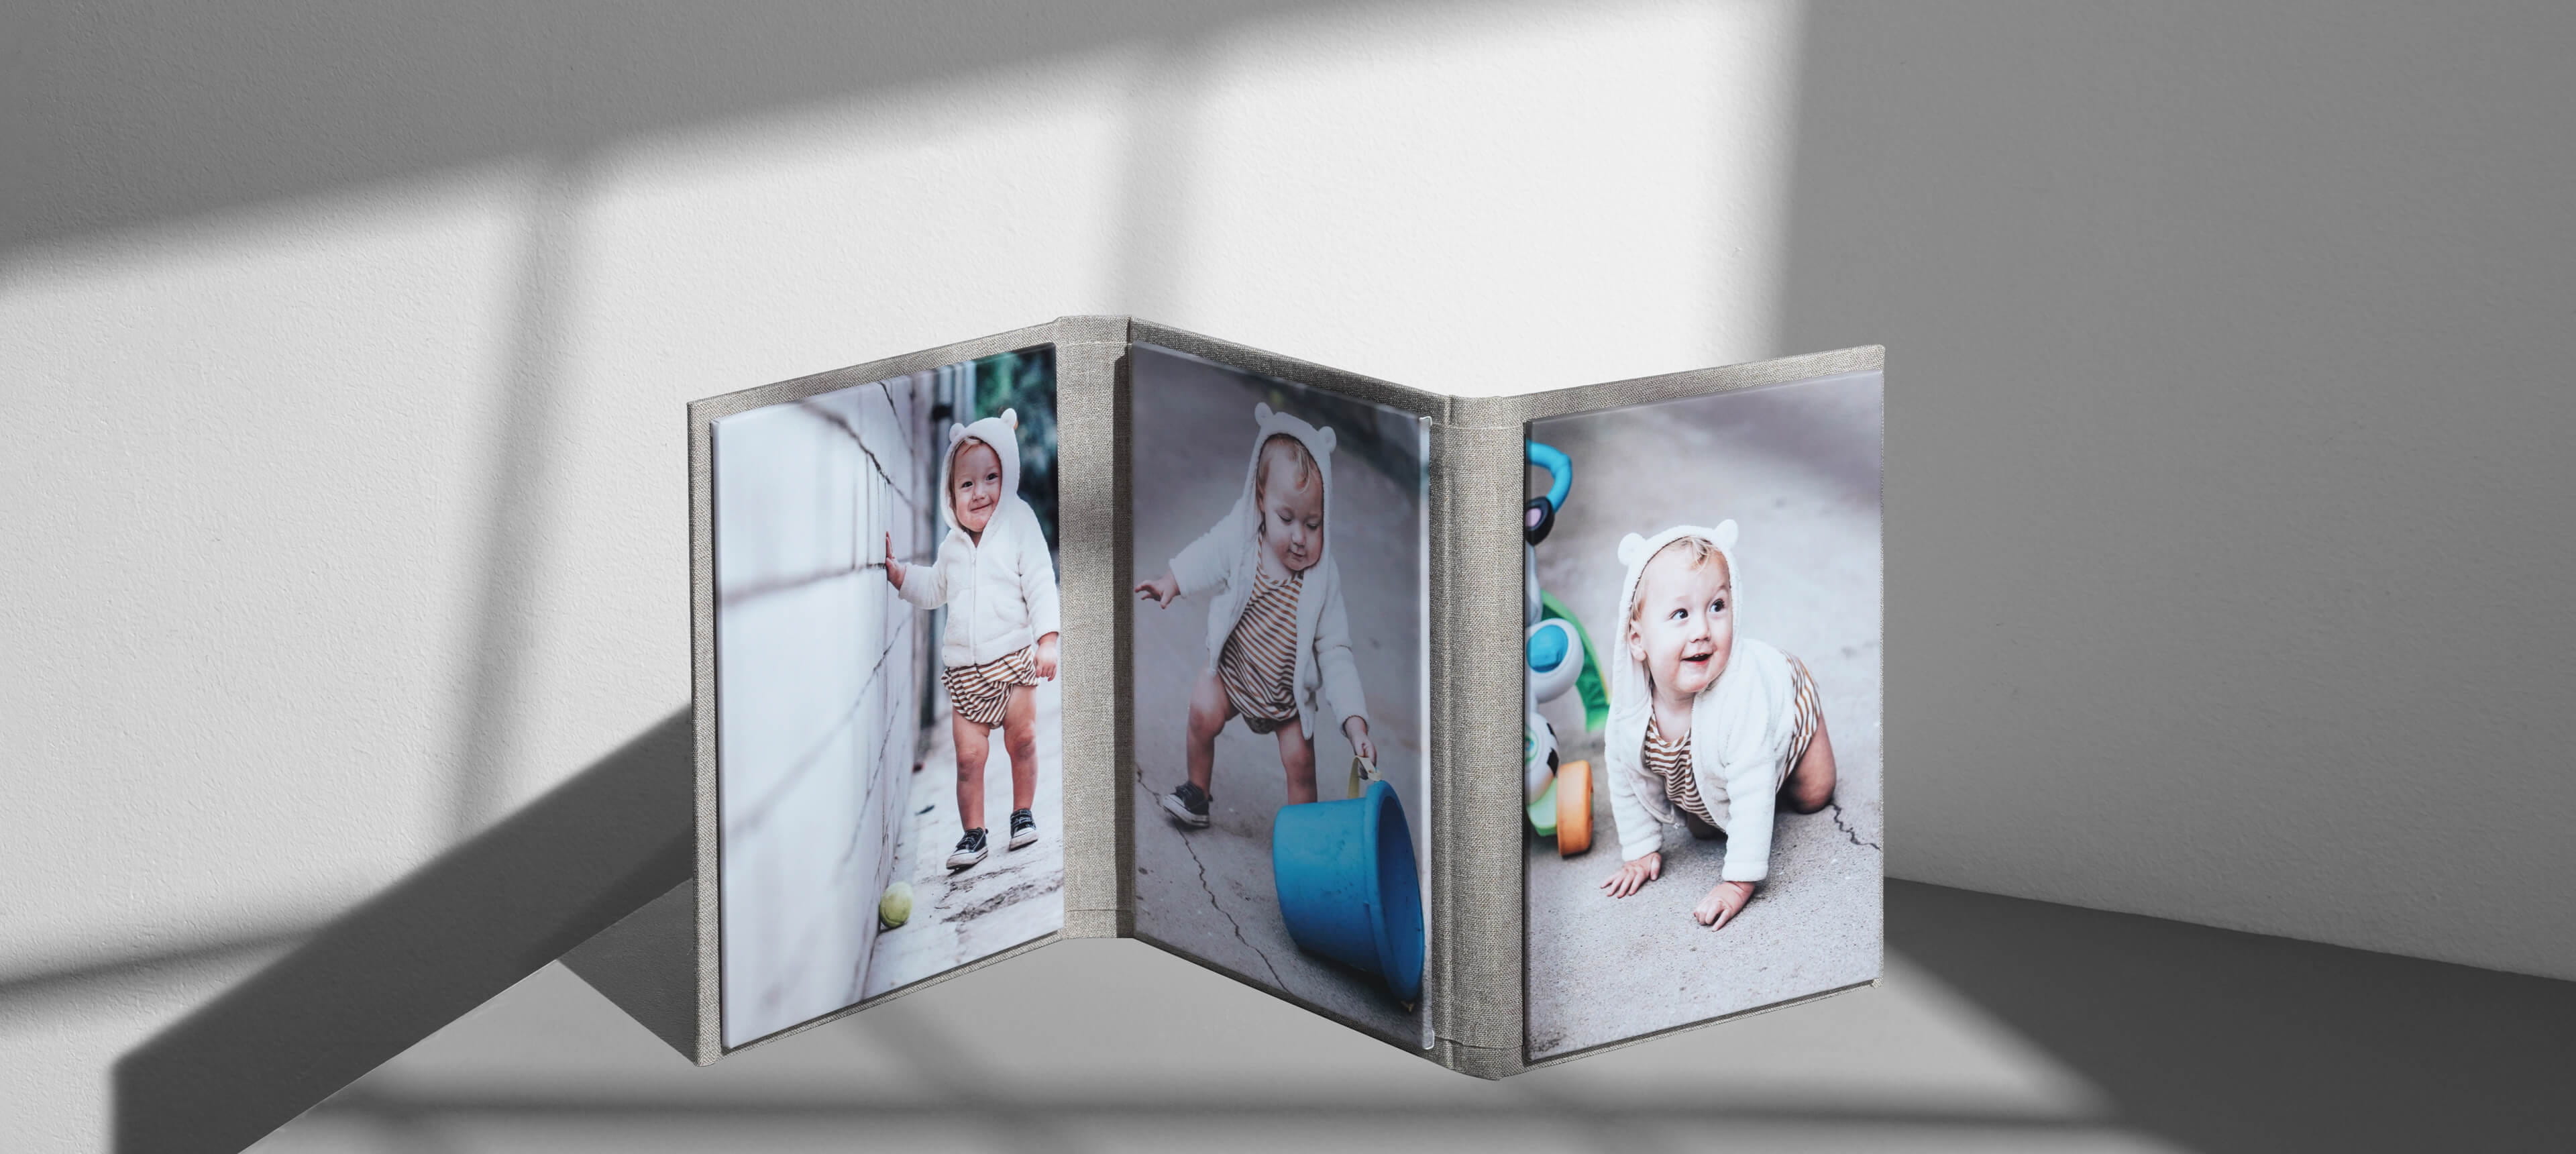 wrapped image folio with three panels showing baby